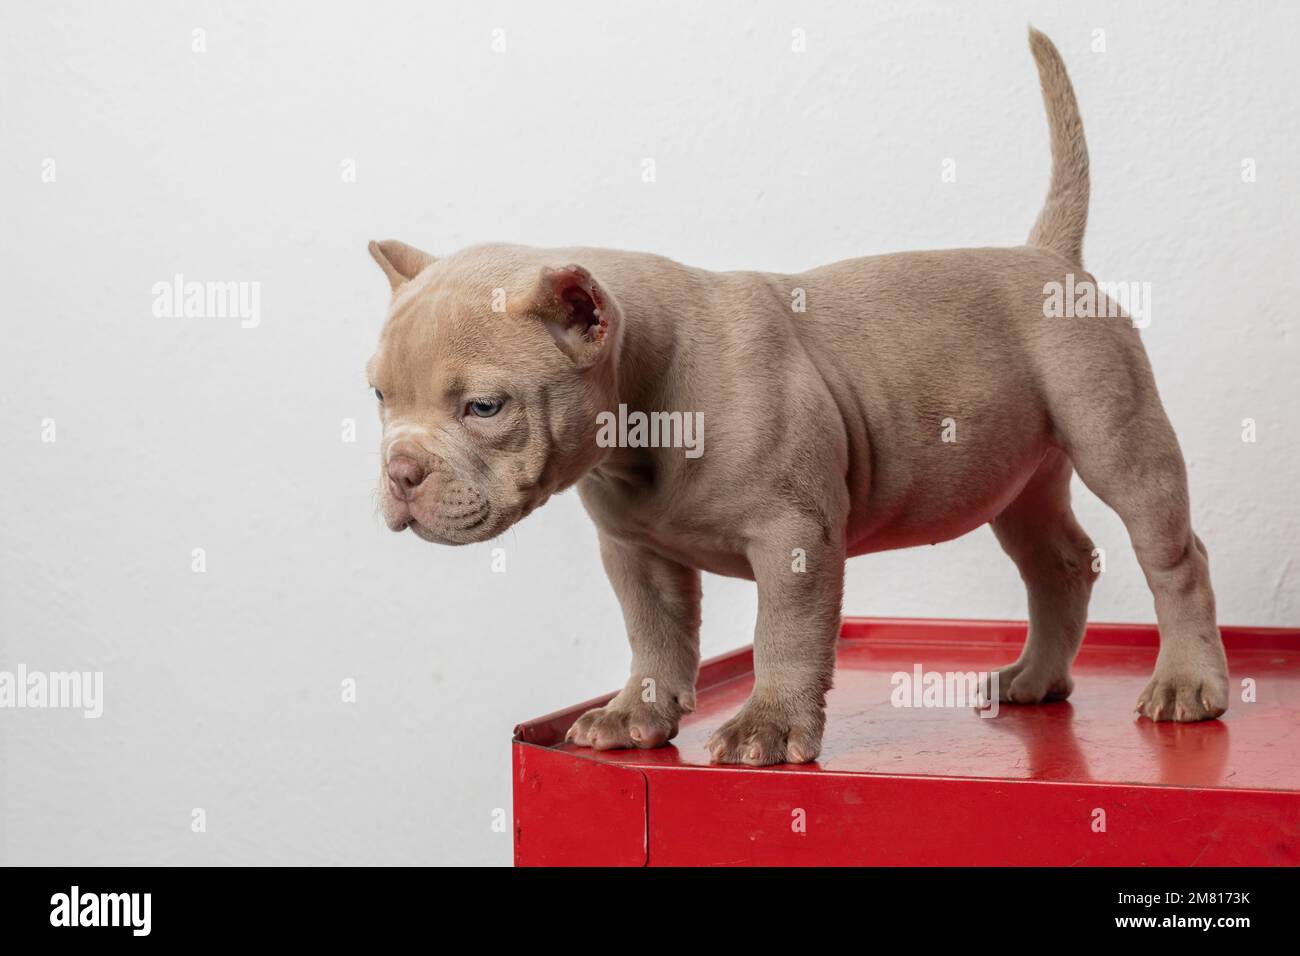 Dog mom American bully puppy dog, Pet funny and Cute Stock Photo - Alamy